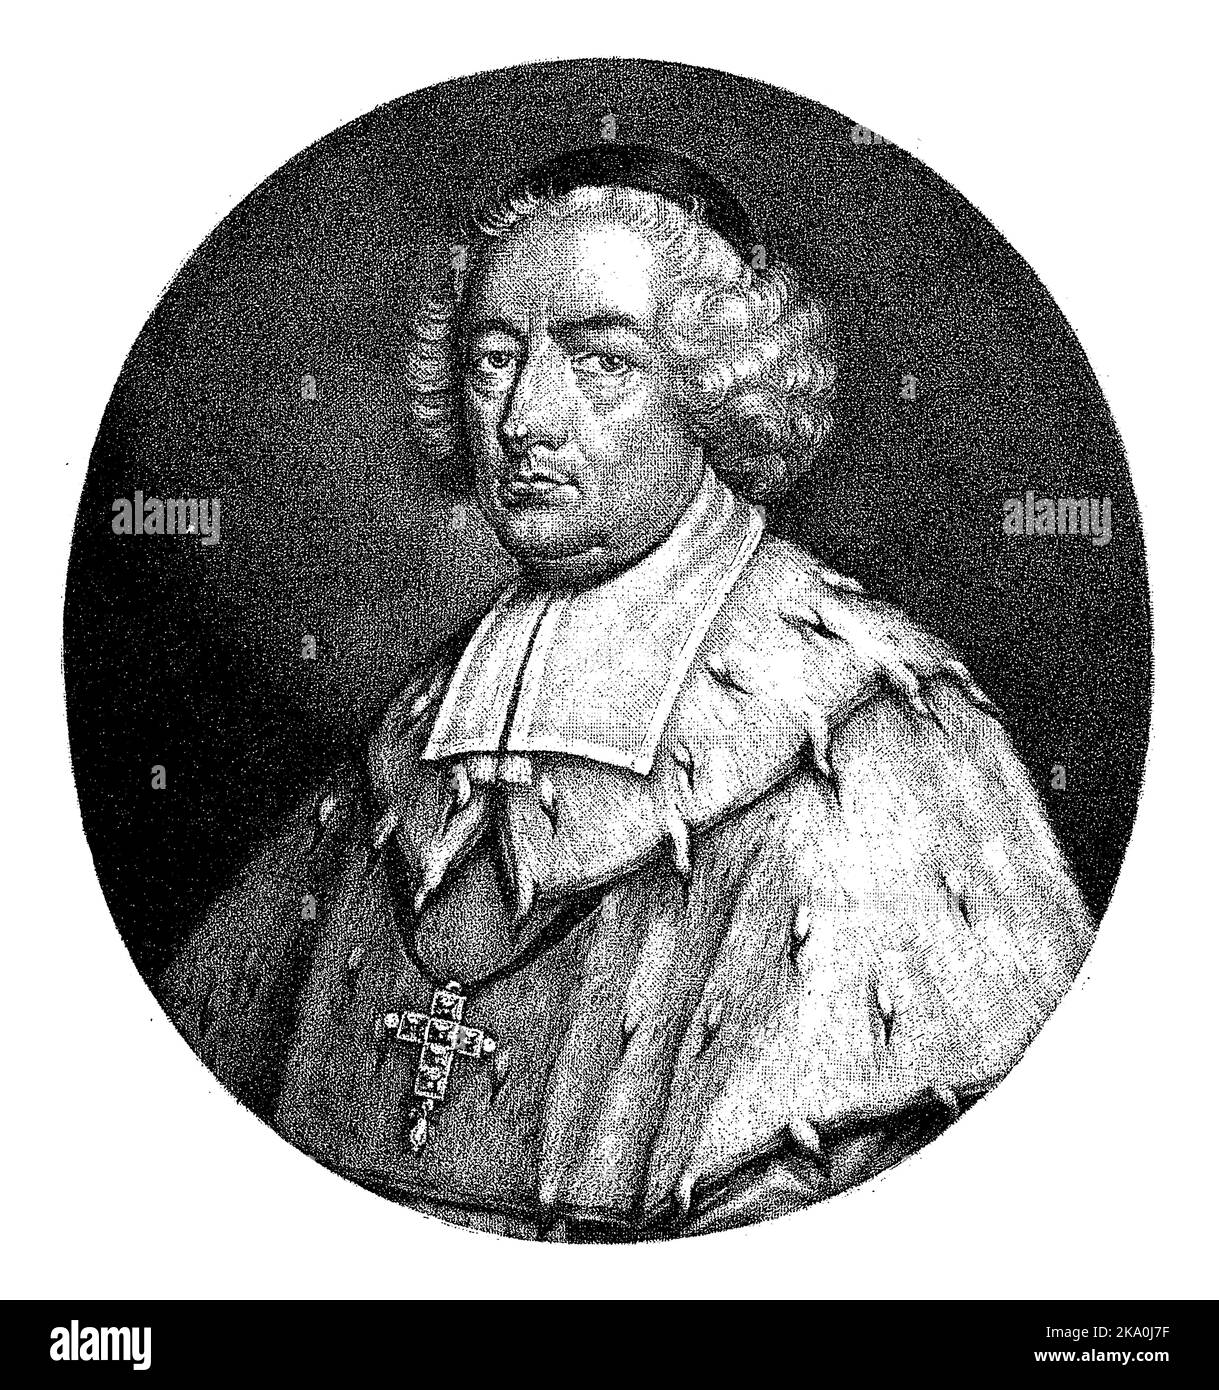 Johann VIII Hugo von Orsbeck, Archduke and Archbishop of Trier. He wears a cloak trimmed with ermine and has a cross around his neck. Stock Photo